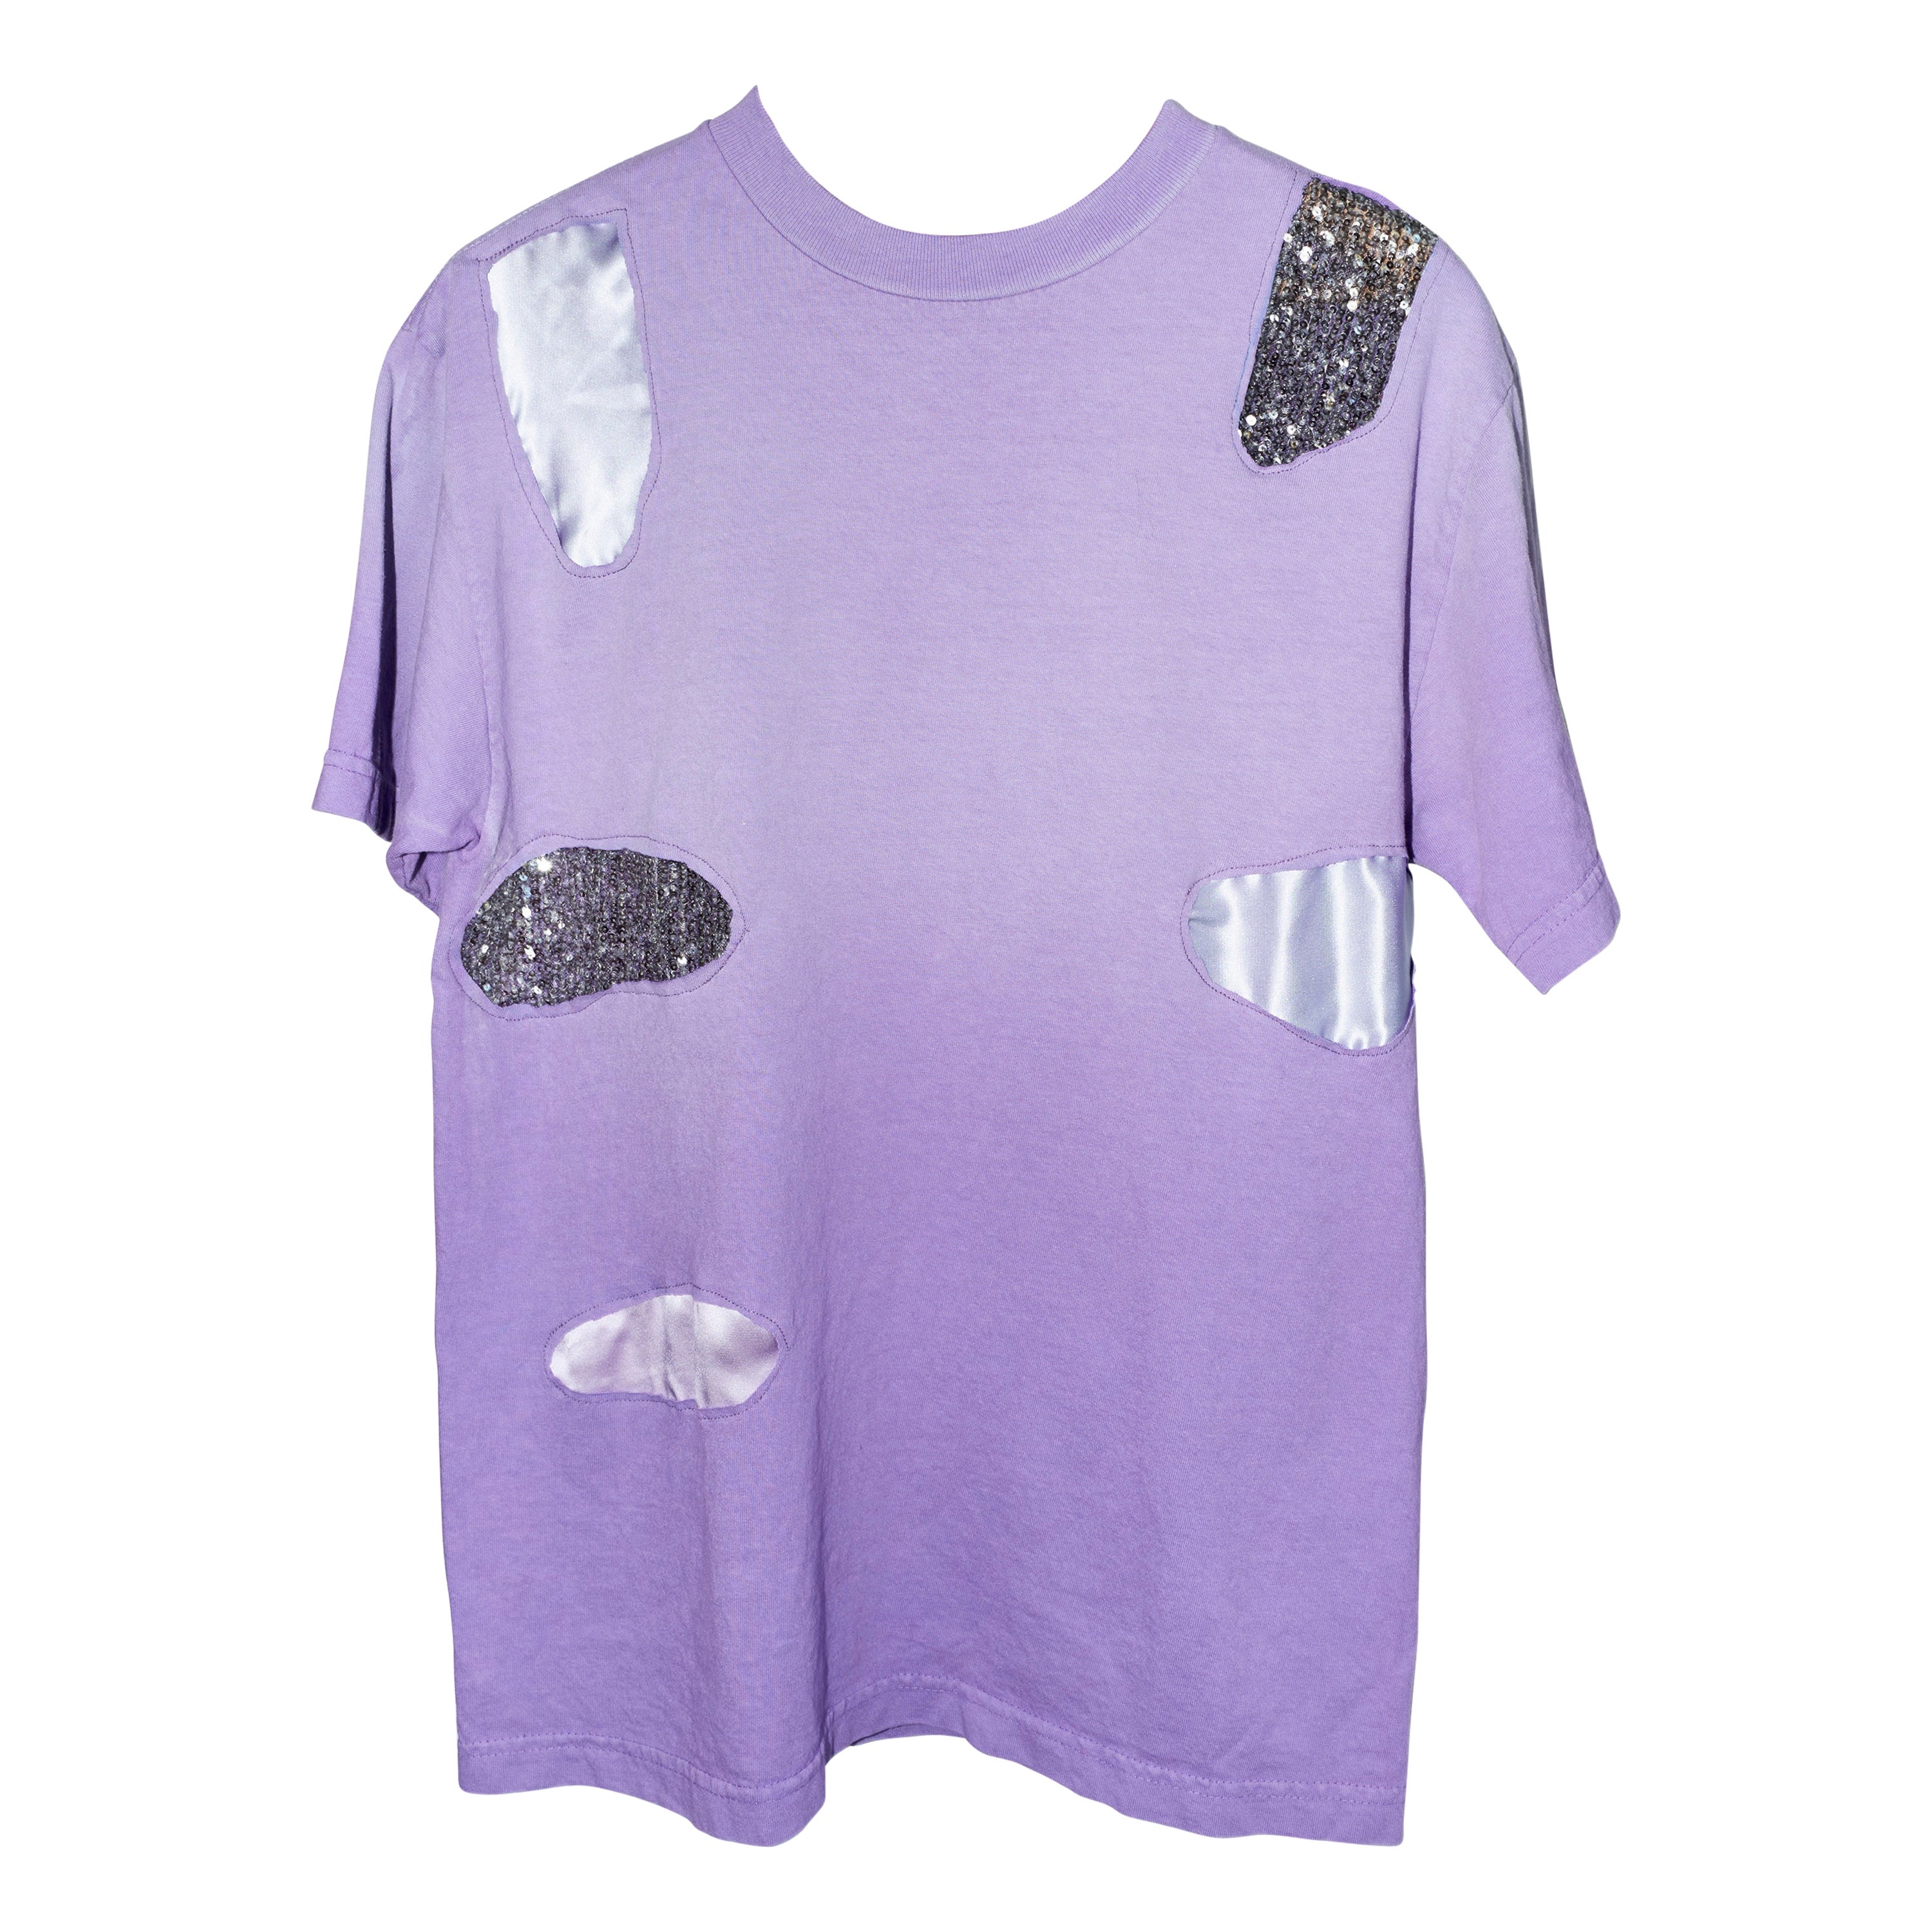 J Dauphin Embellished Lilac T-Shirt Patch Work Sequin Silk Body Cotton